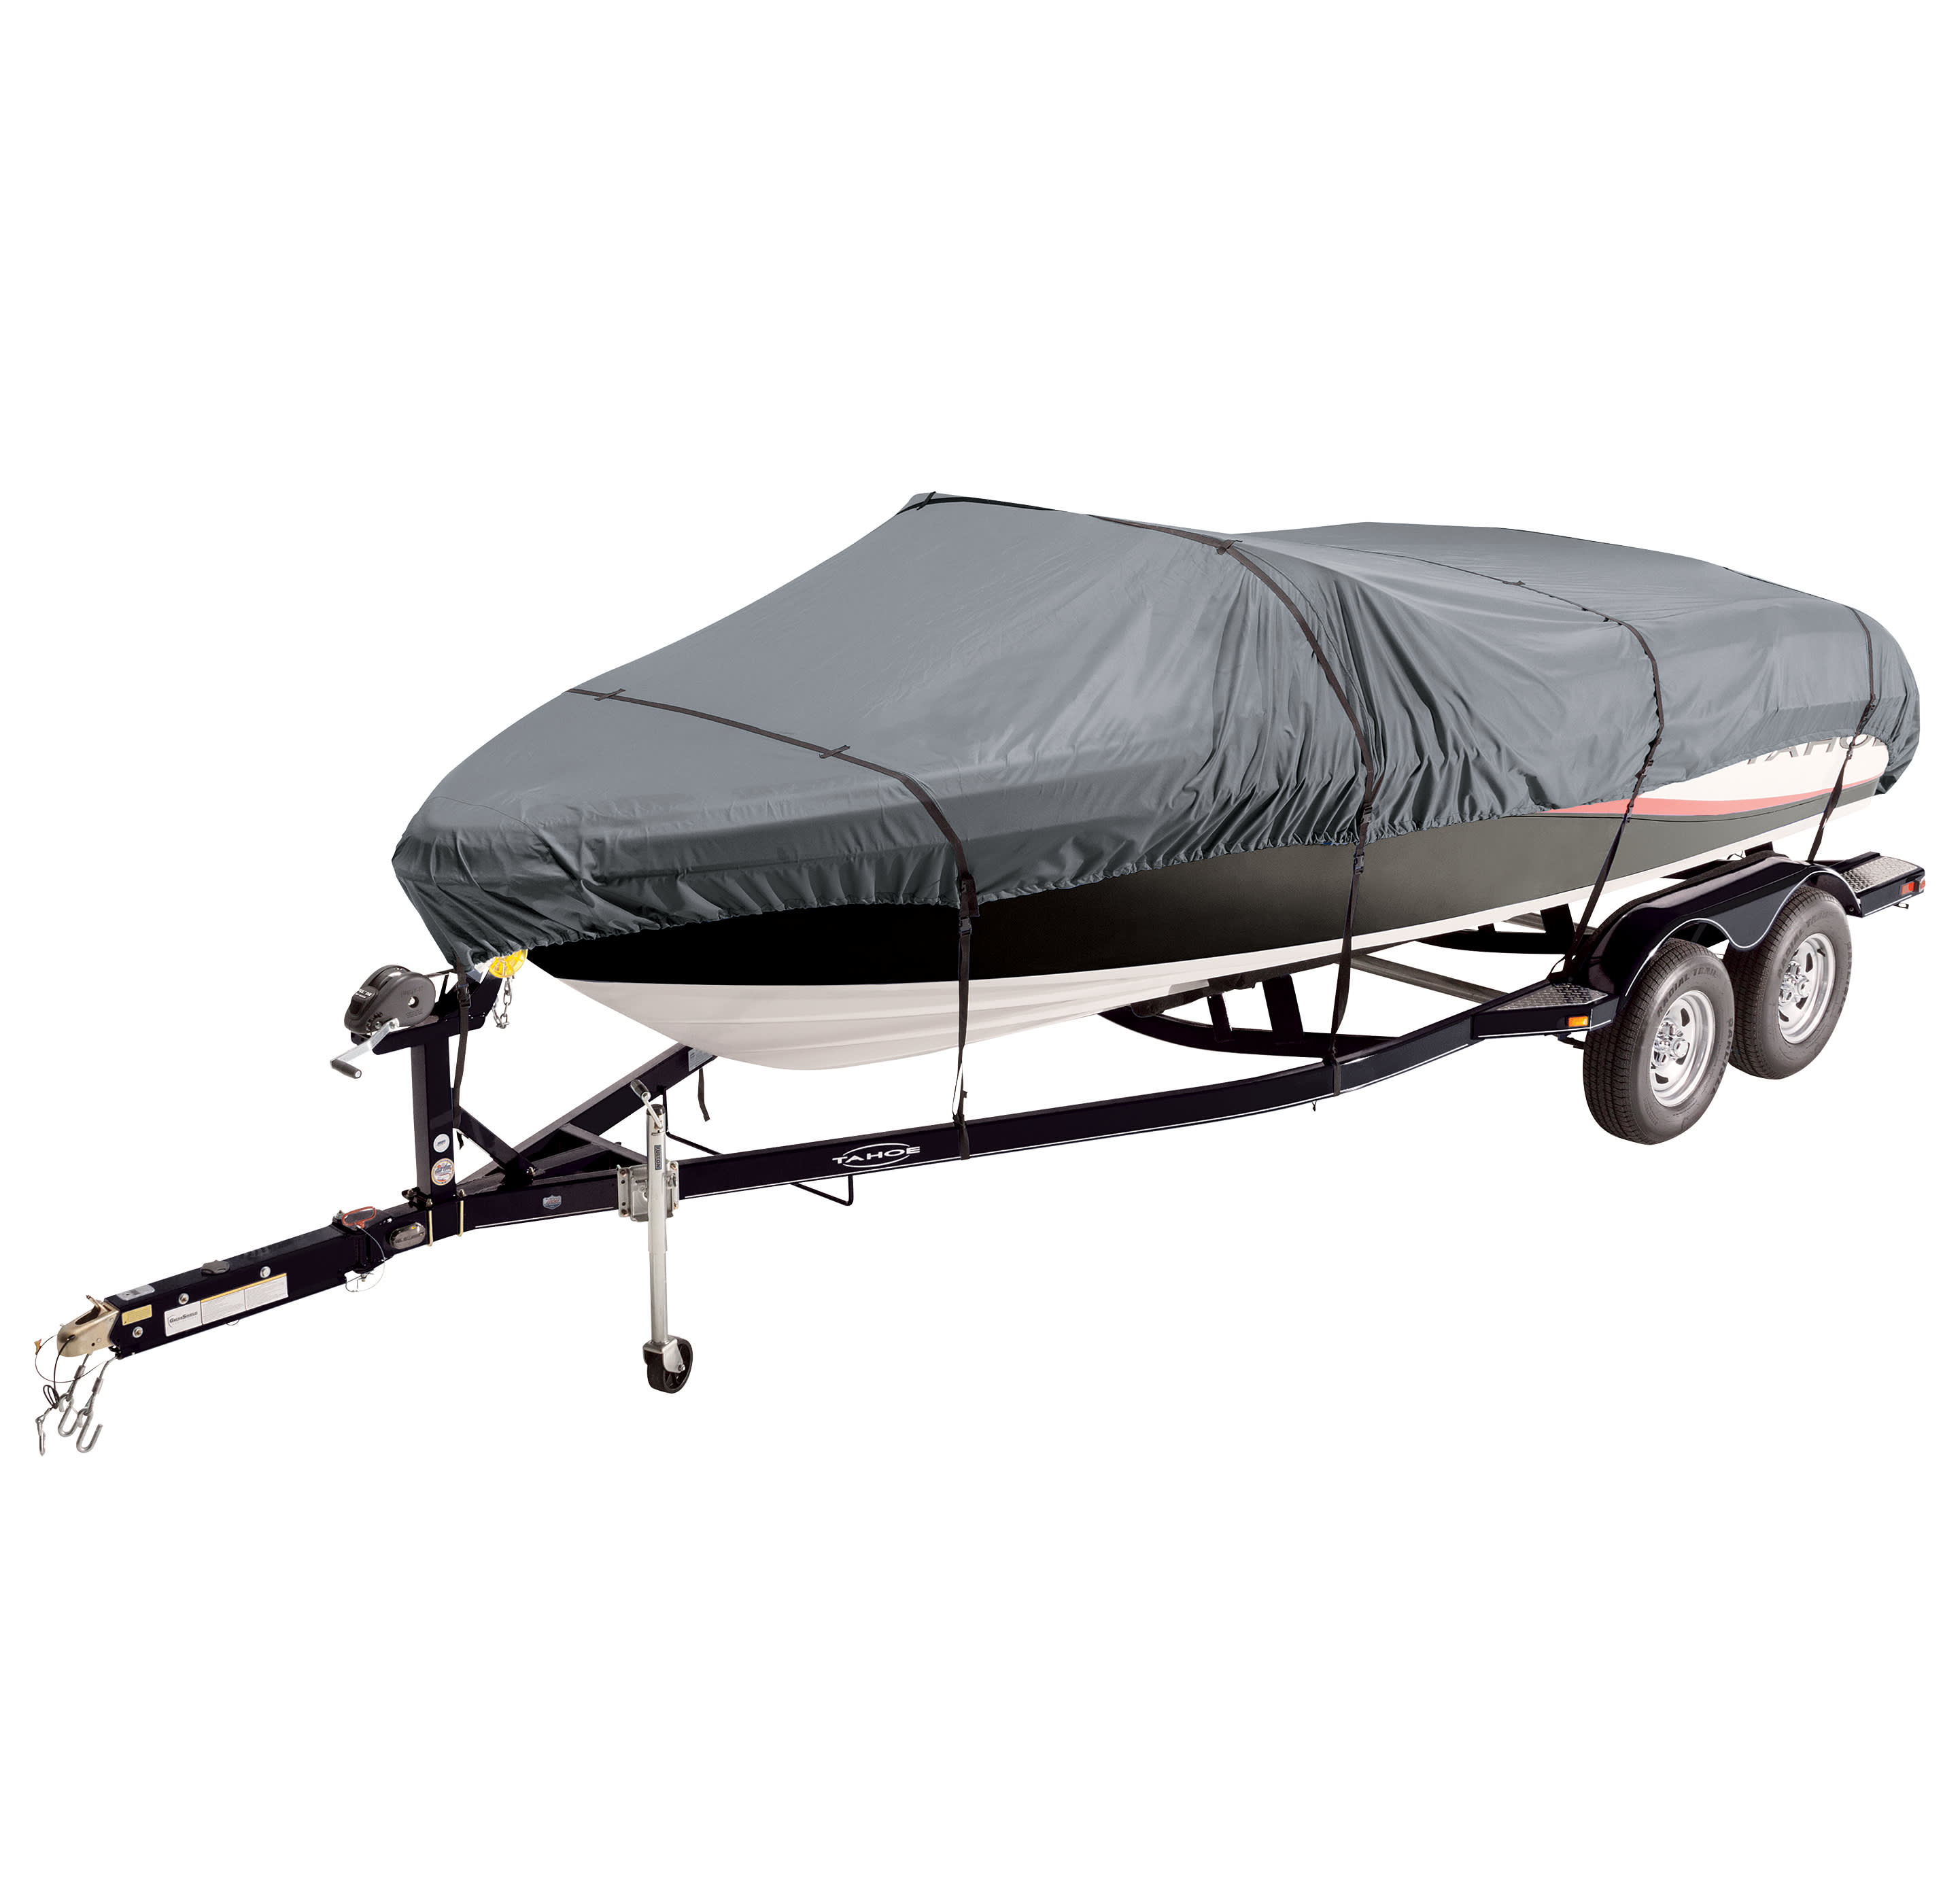 Small utility trailer for BassBaby / Pelican style boat? - Bass